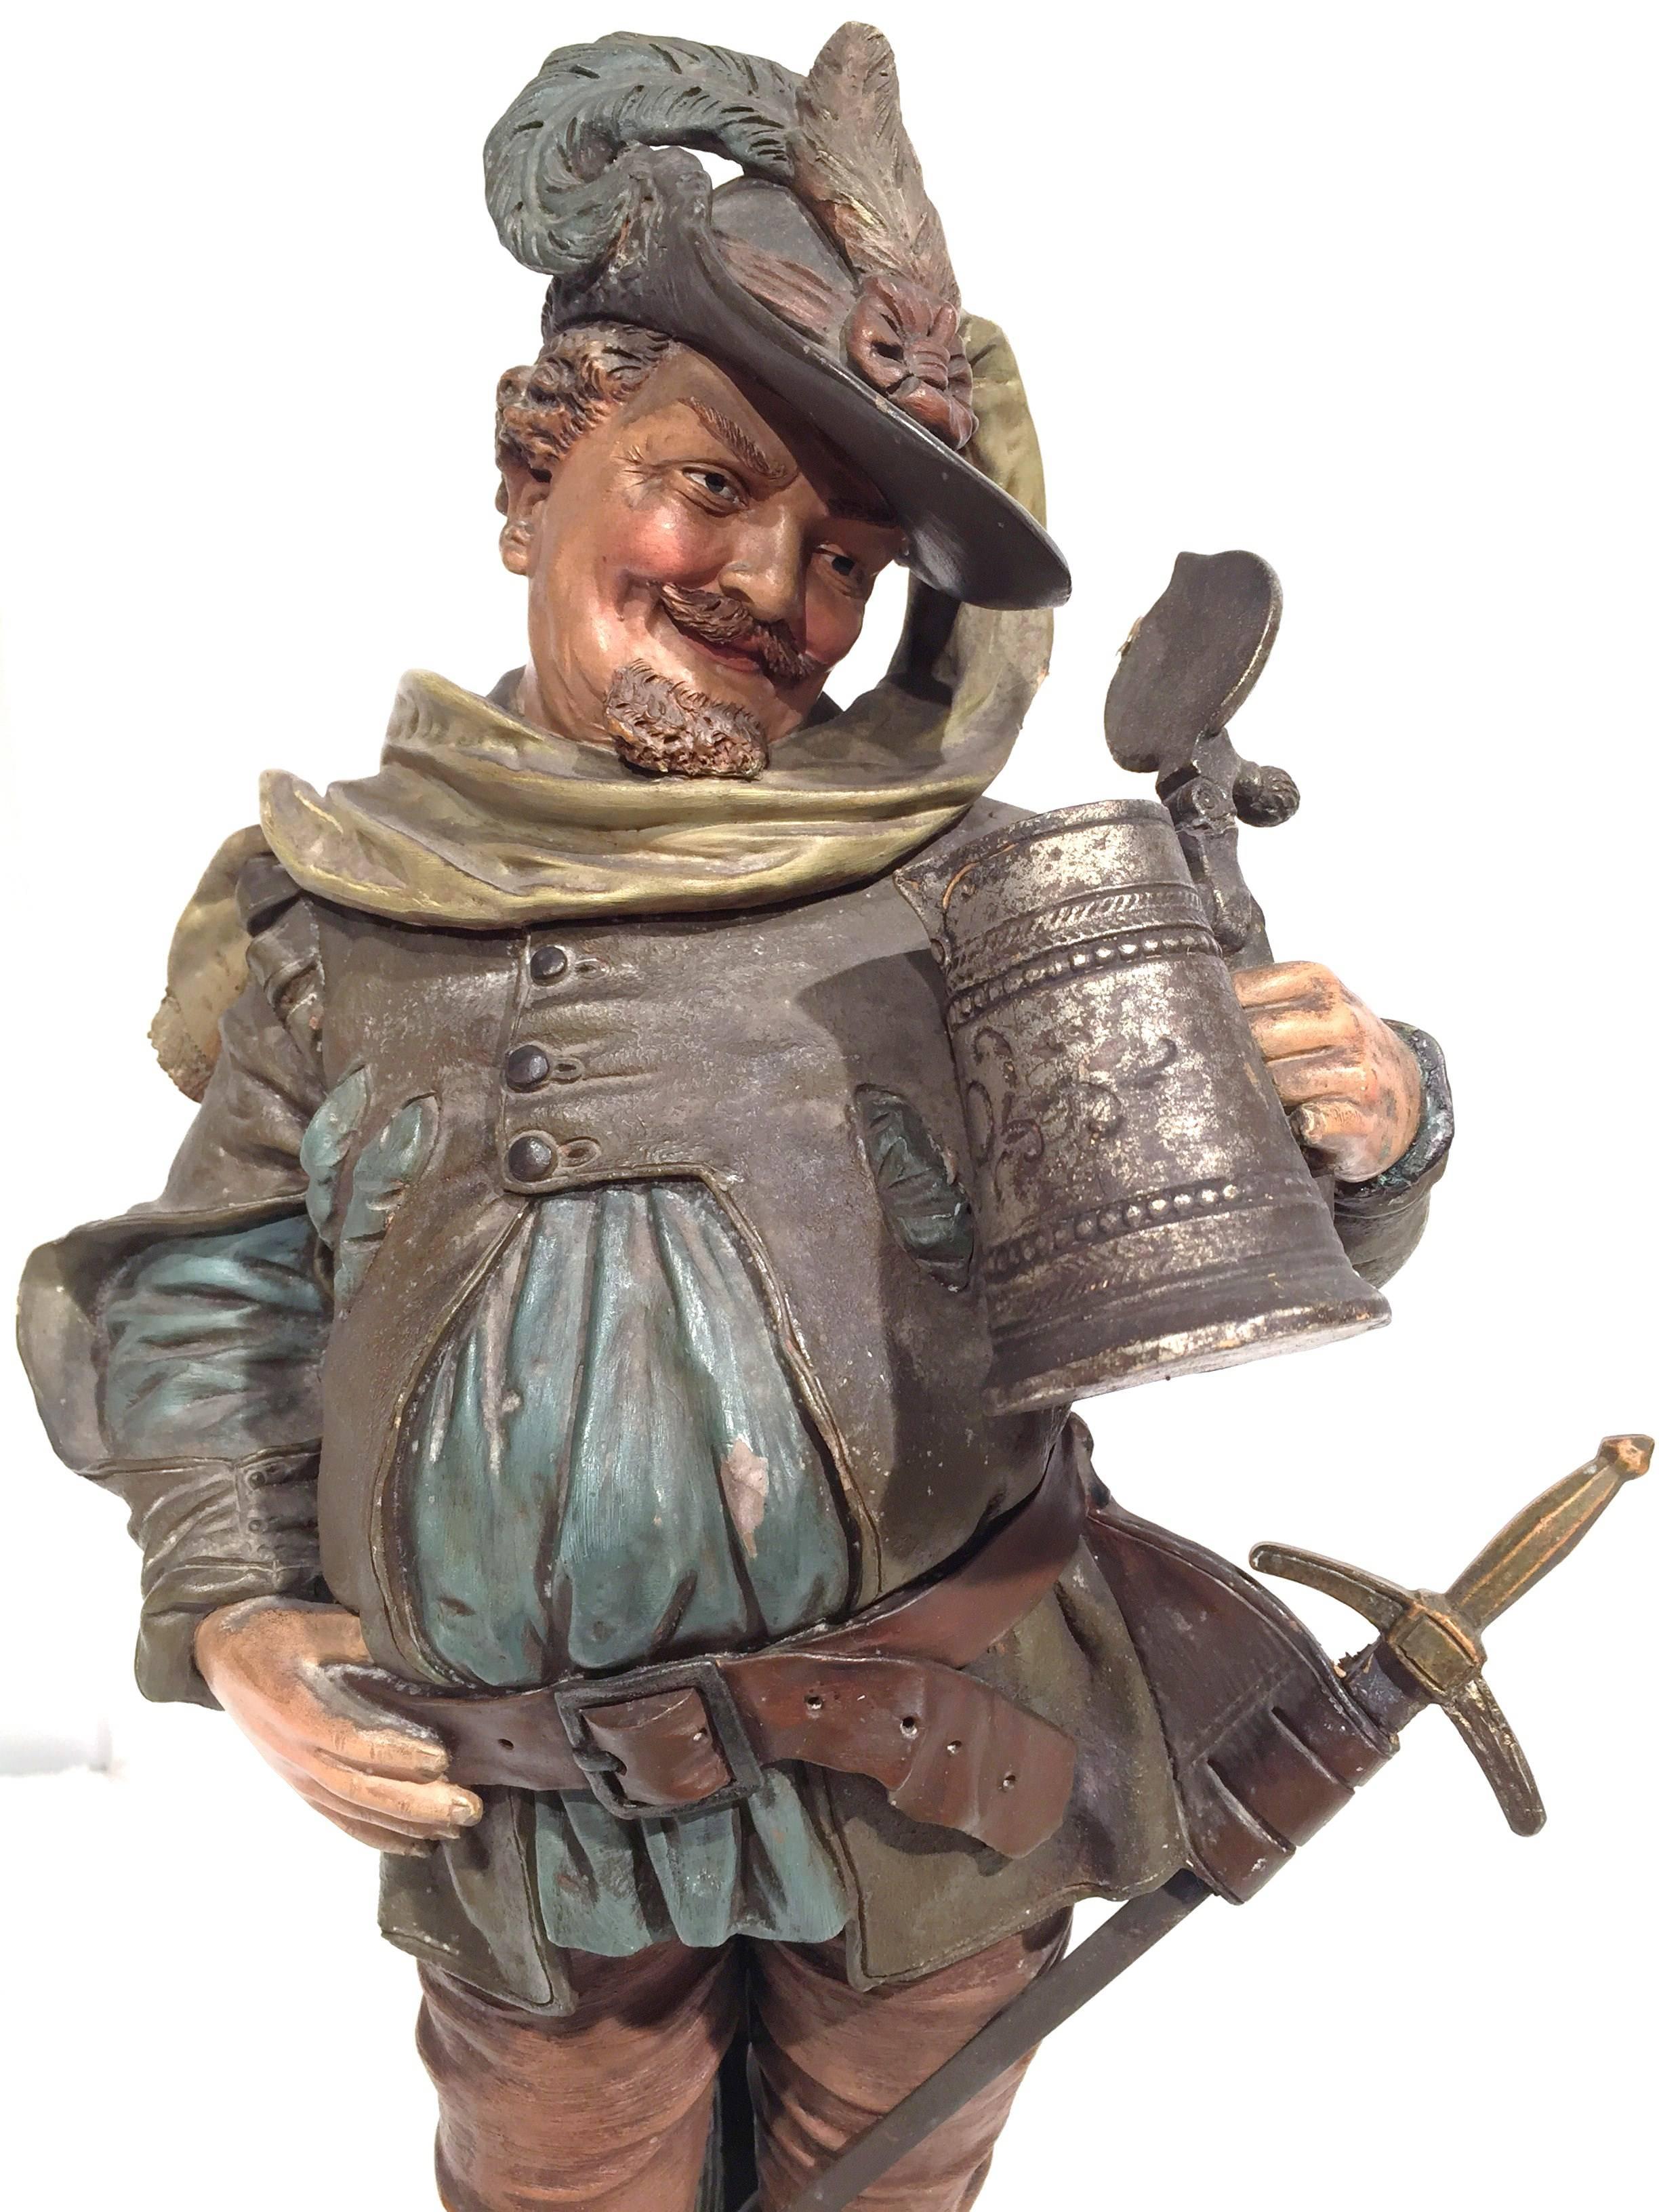 This antique musketeer terracotta figurine was created in Northern France, circa 1890. The 